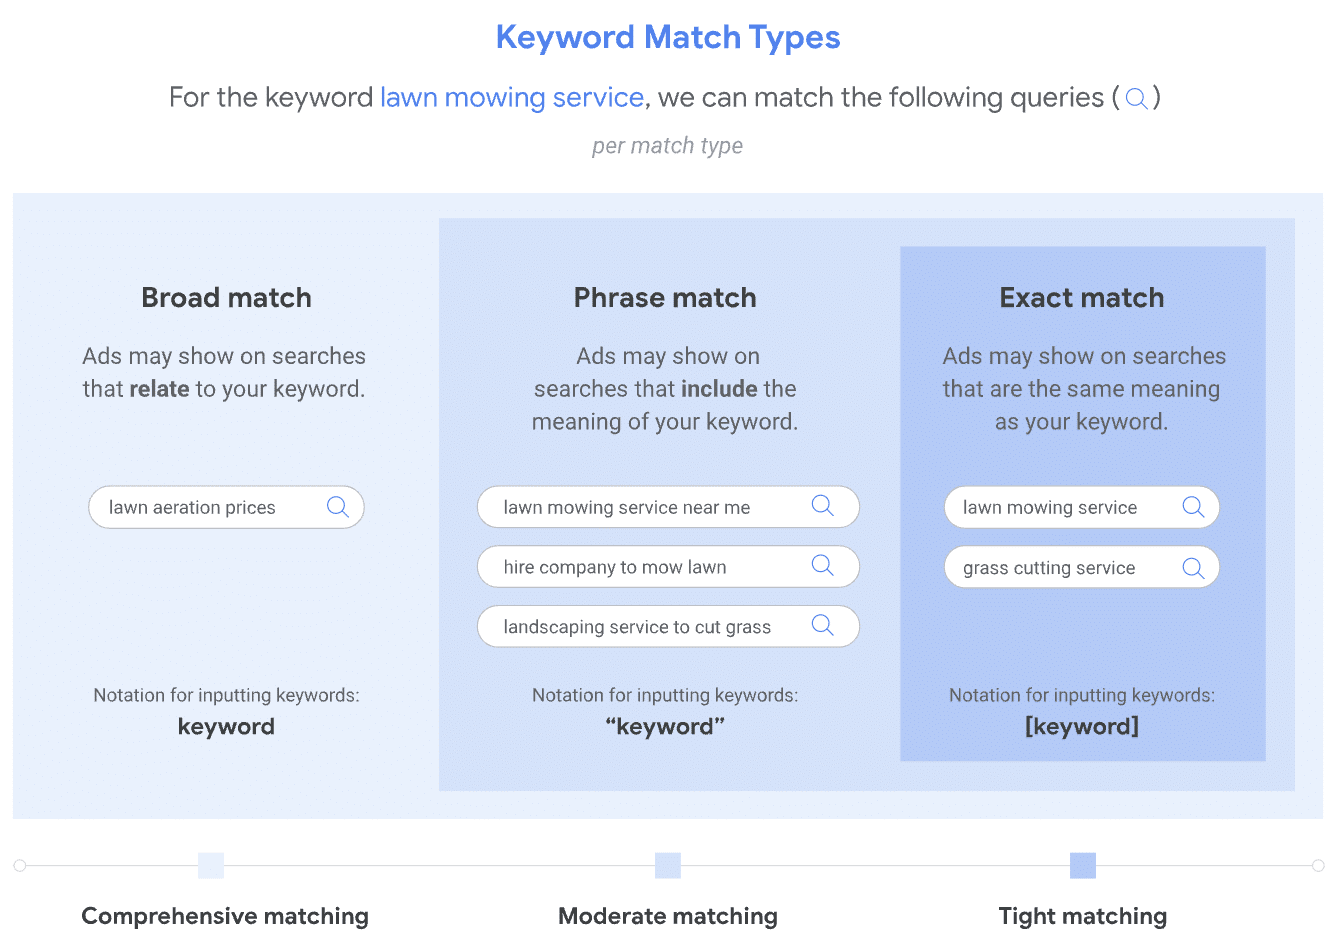 Defining broad match and the other types